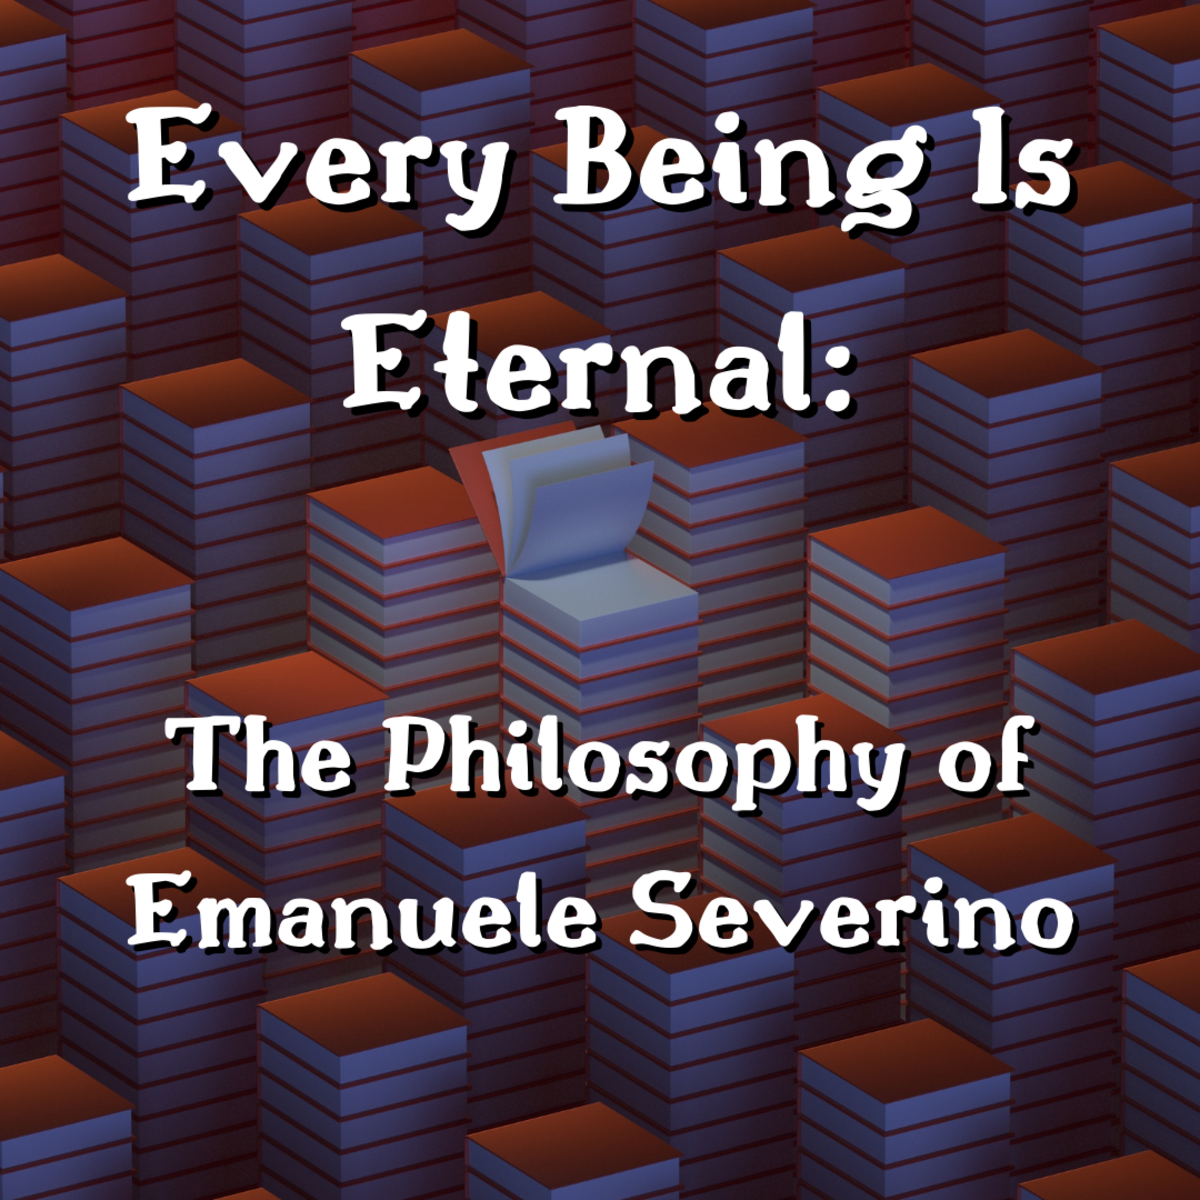 Read on to learn about the radical and rigorous philosophical thought of Emanuele Severino, who argued that experience is a sequence of eternals, that things do not come from and return into nothingness.